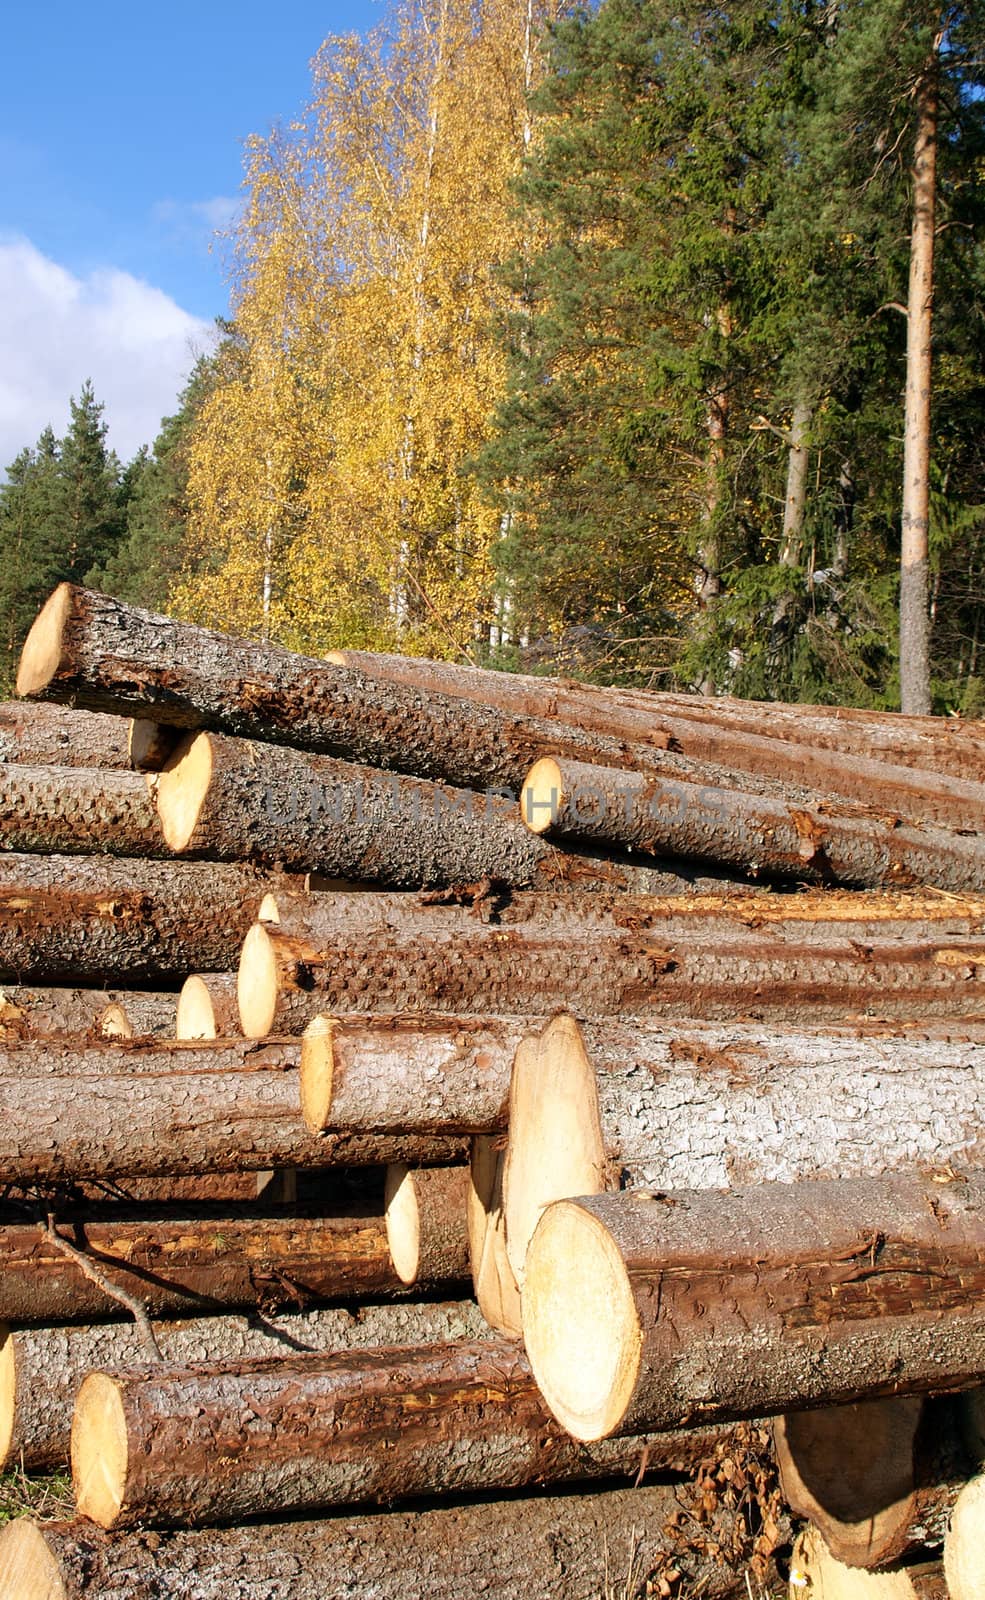 A vertical view of stacked Spruce logs with autumn forest in the background. Photograped in Salo, Finland October 2010.